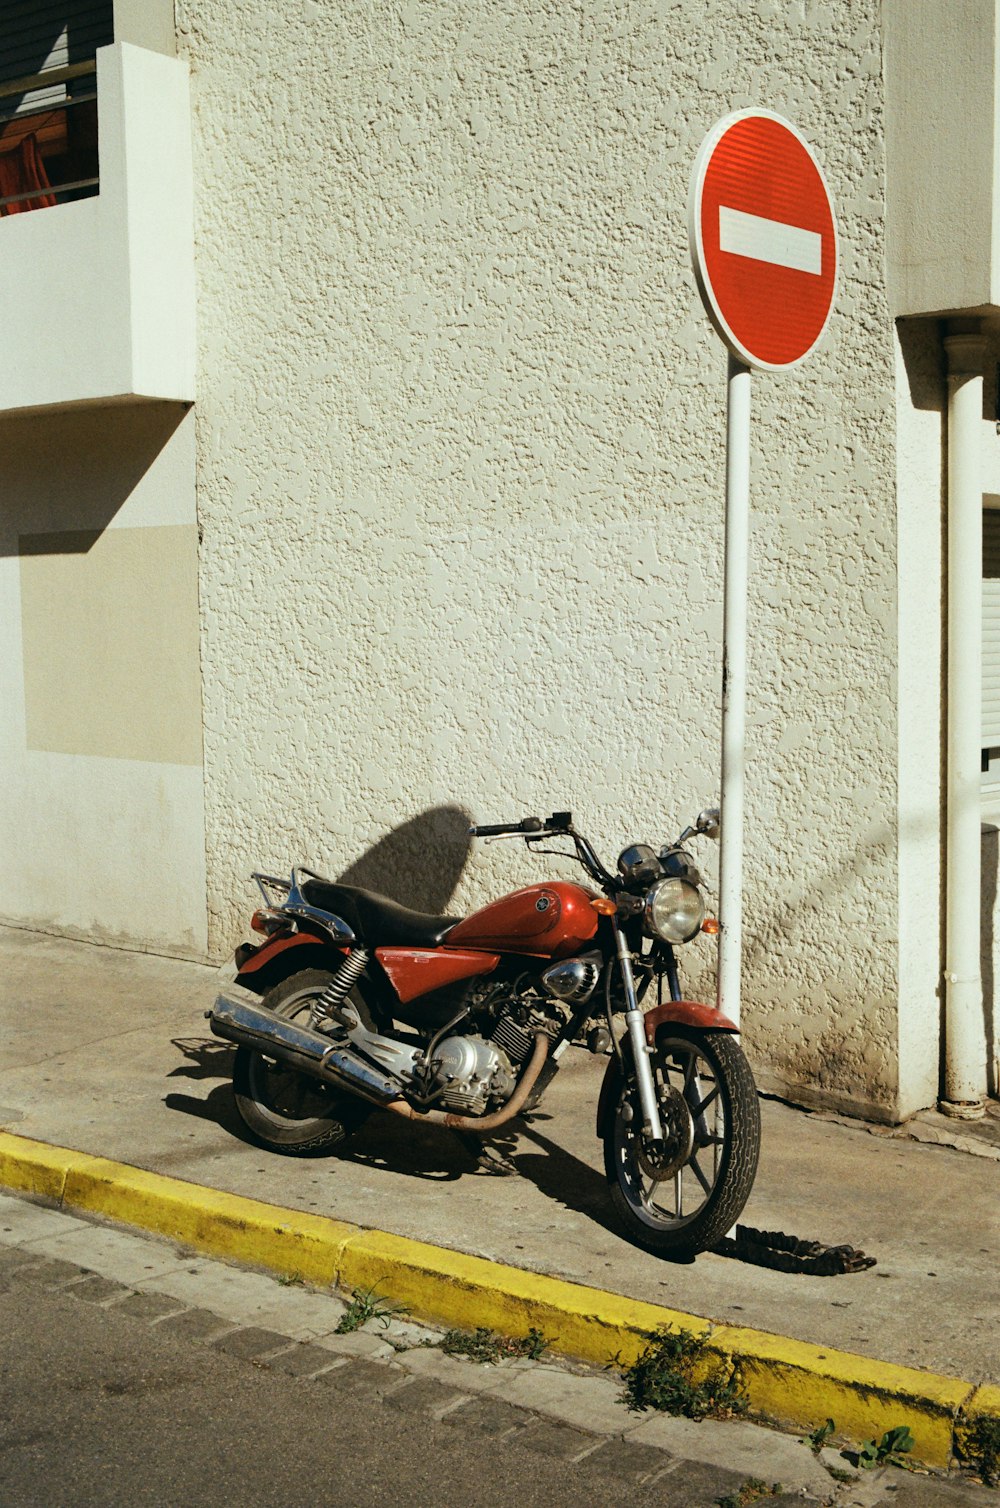 a motorcycle parked next to a no parking sign